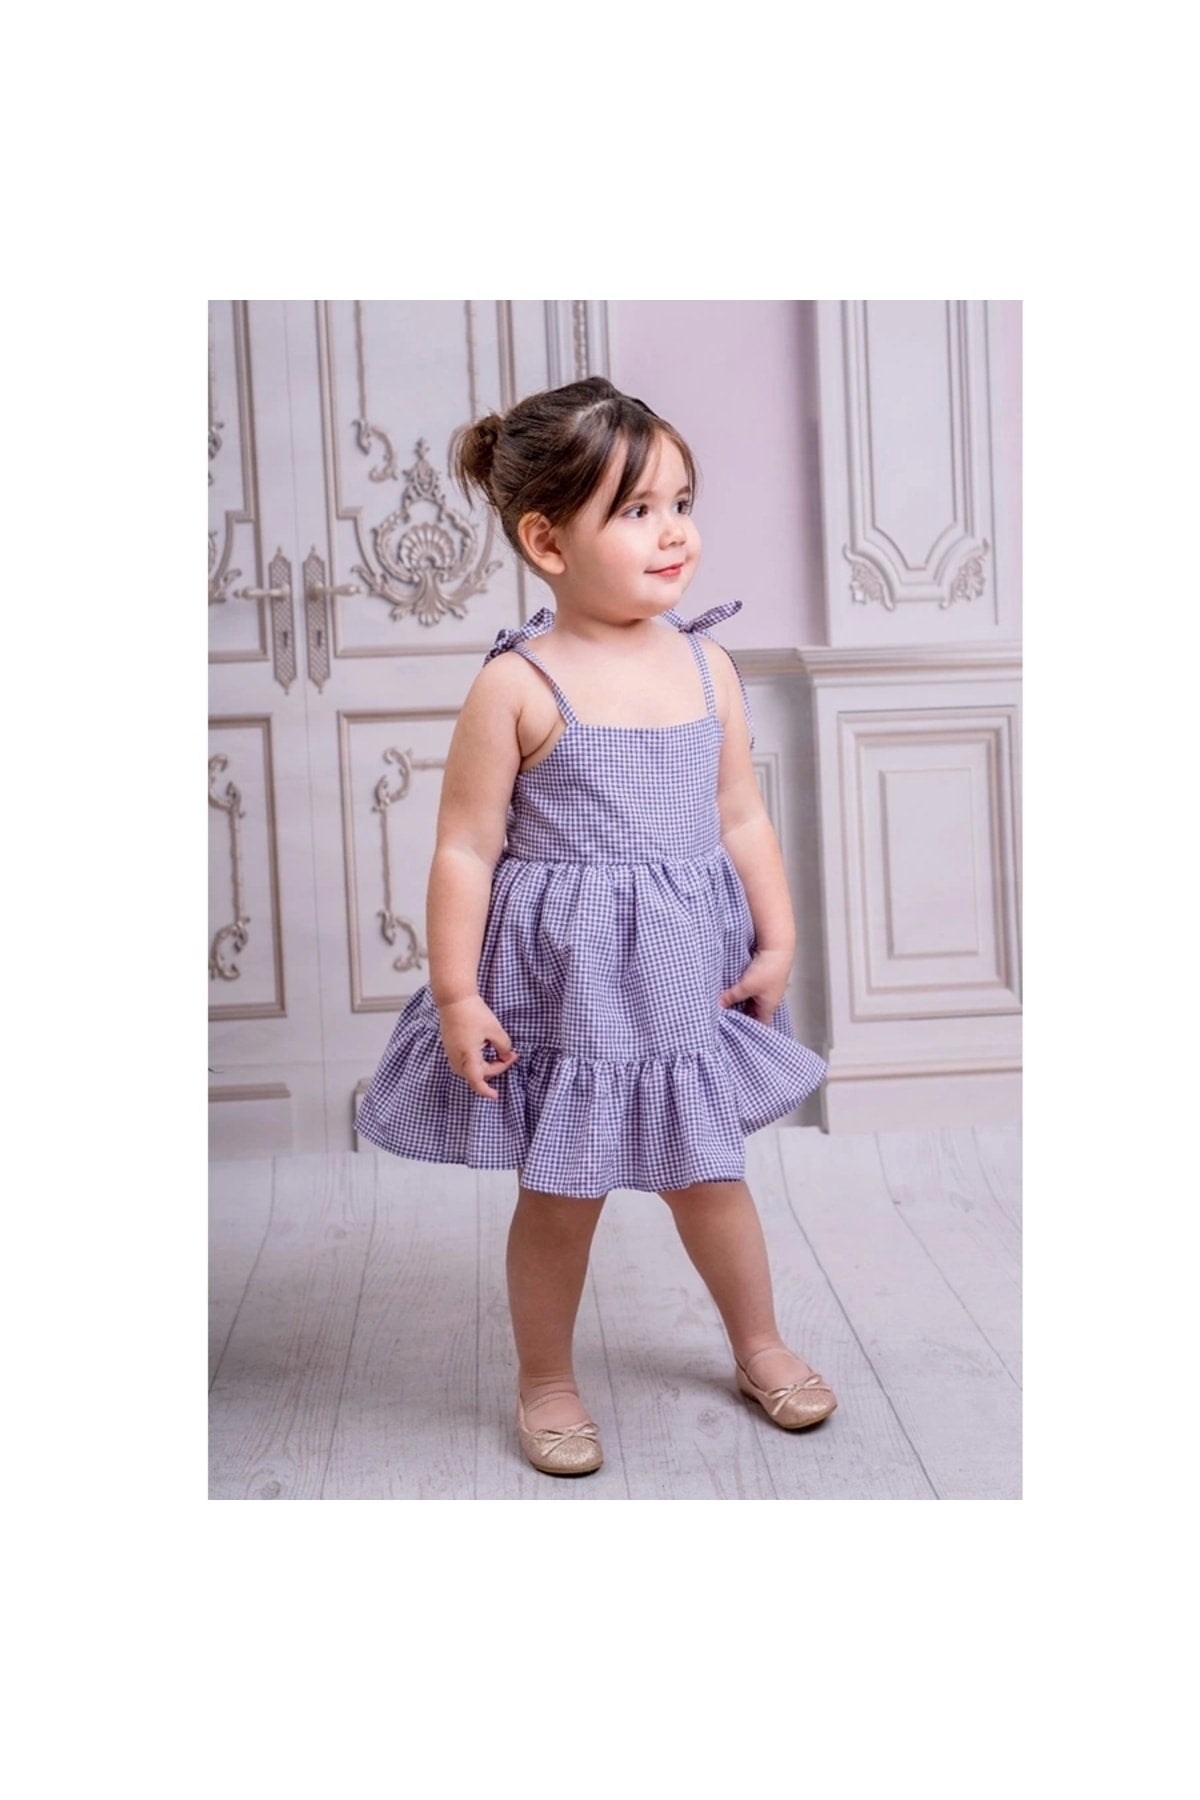 Plaid Rope Strap Kids Summer Dress - Stylish And Comfortable Design